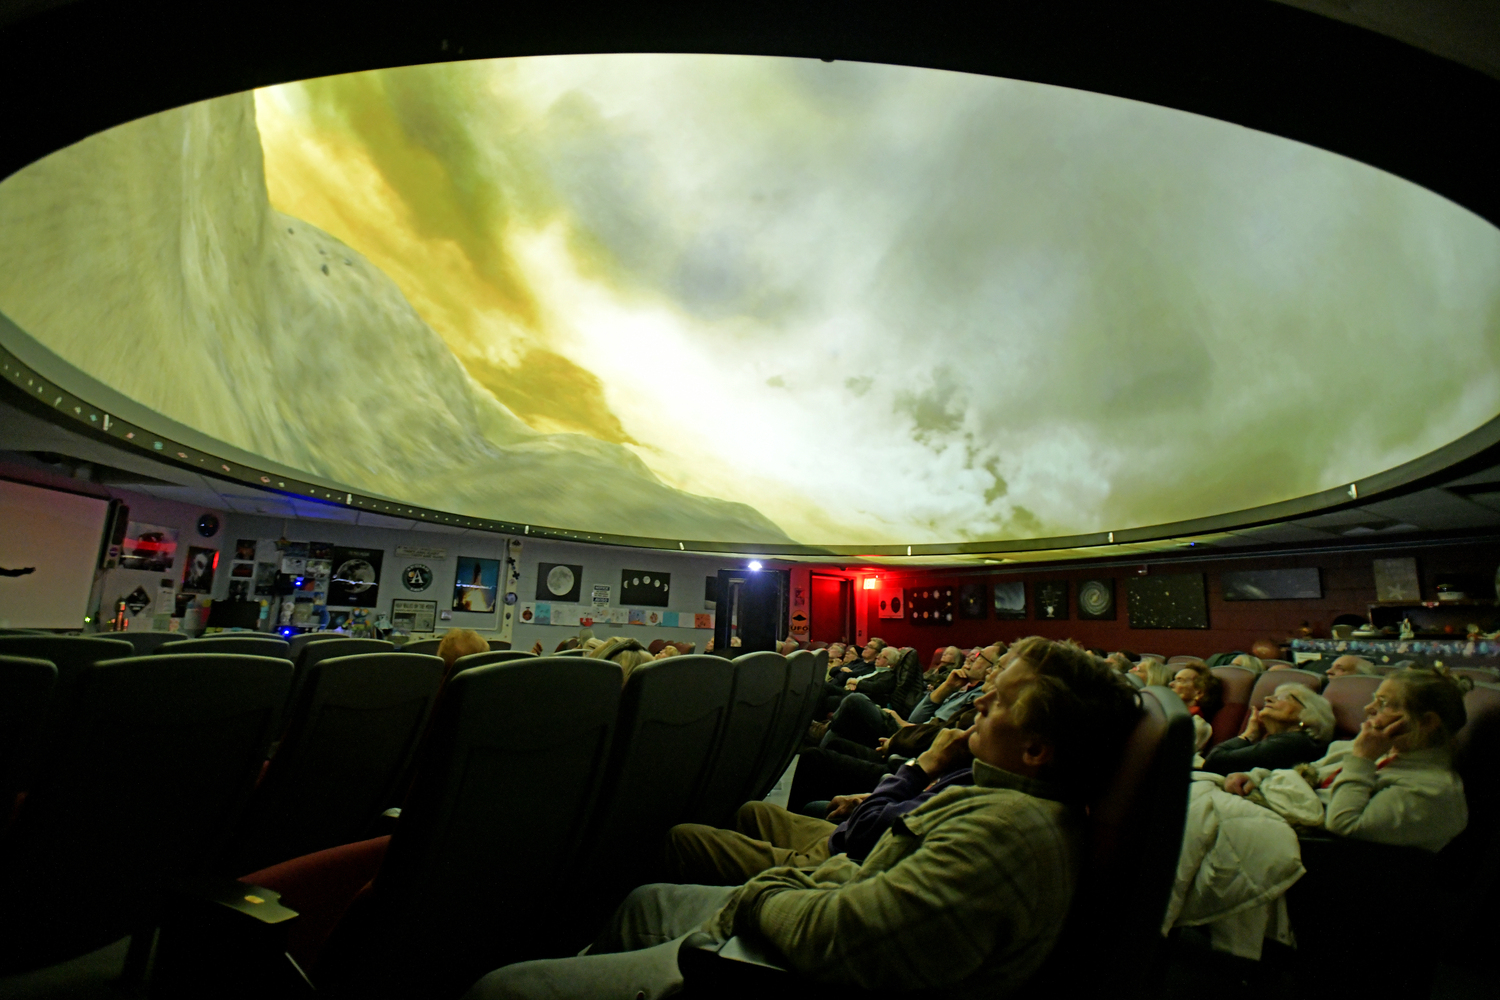 The Dark Skies Committee of Southampton Town hosted an event in the Southampton High School planetarium on Friday. April is 